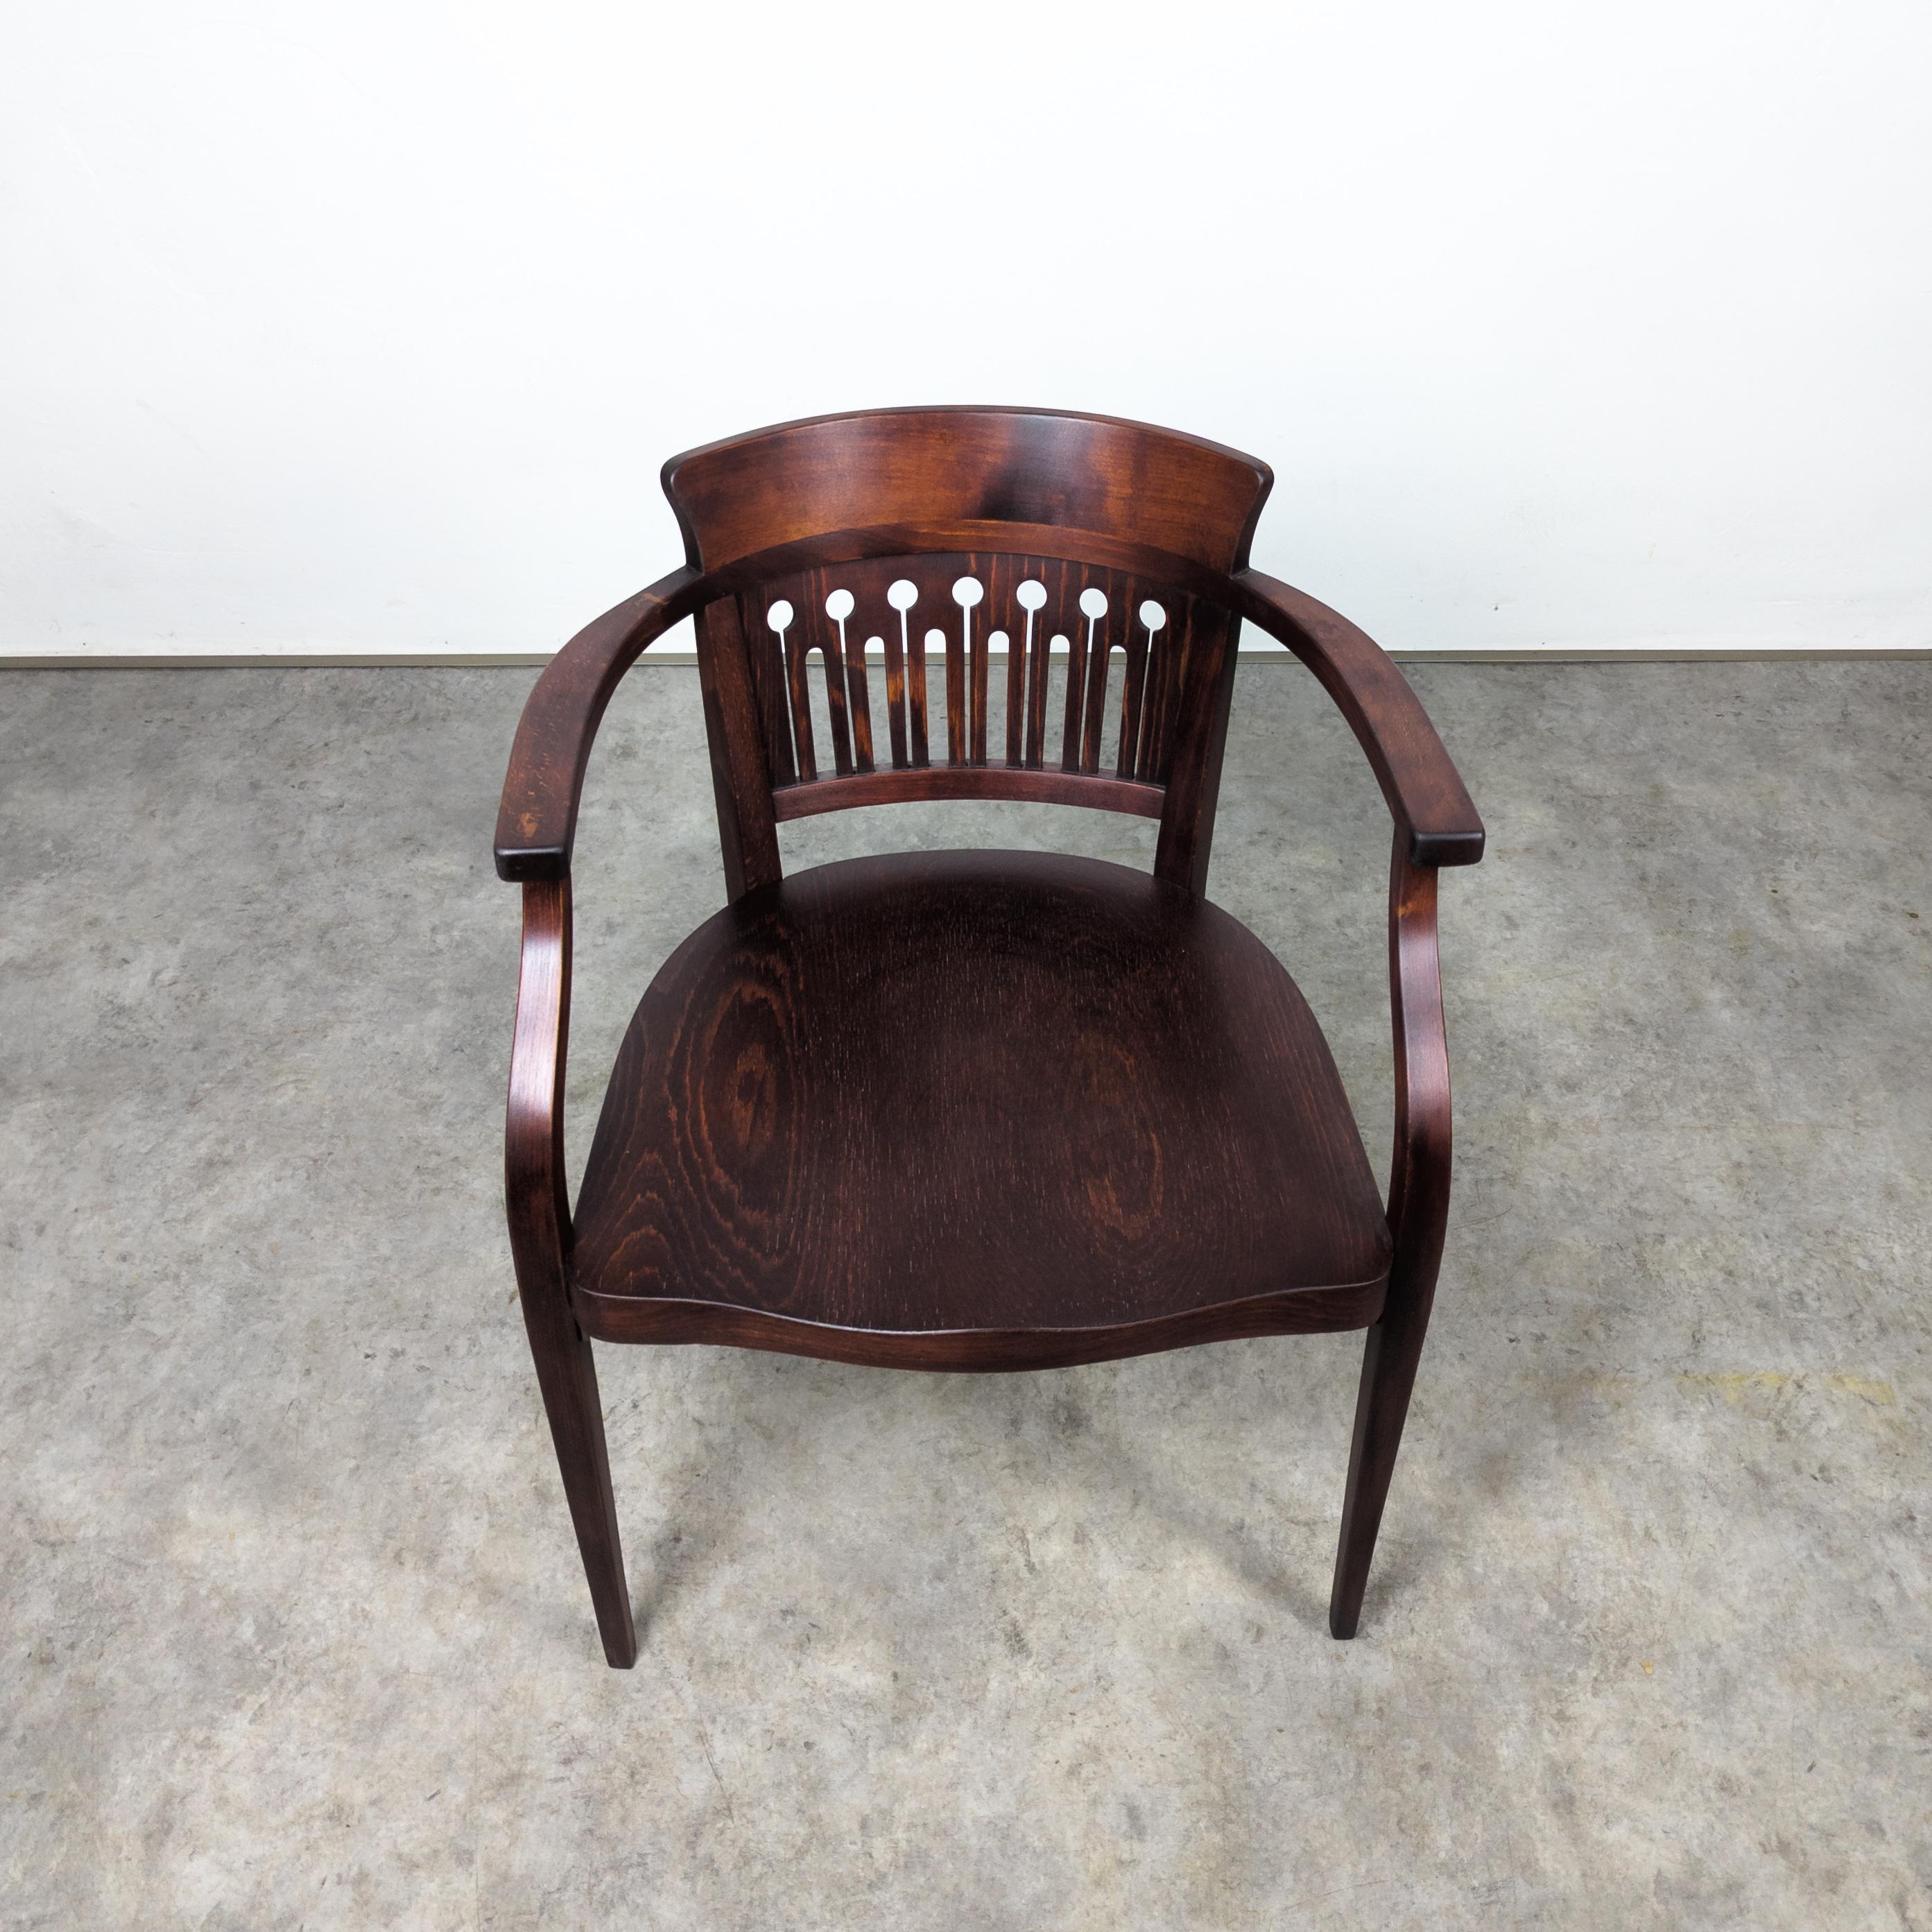 Beech Thonet No. 6515 armchair by Otto Wagner